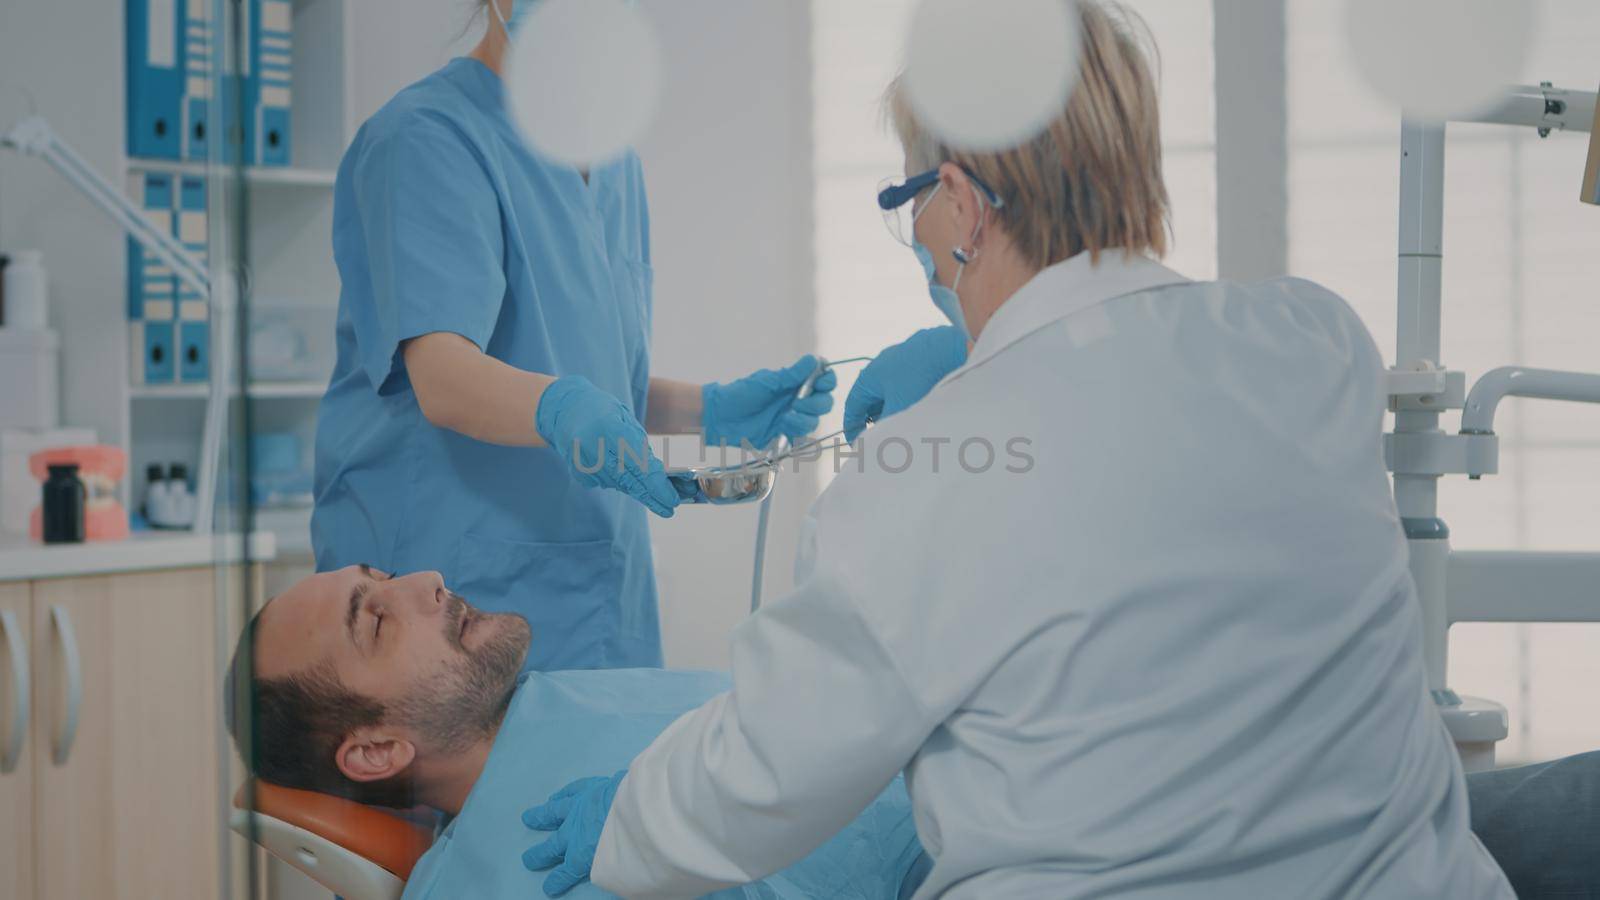 Team of specialists doing surgical procedure on man with toothache, using dental tools and instrument for stomatology operation. Dentist and nurse extracting teeth at oral care clinic.